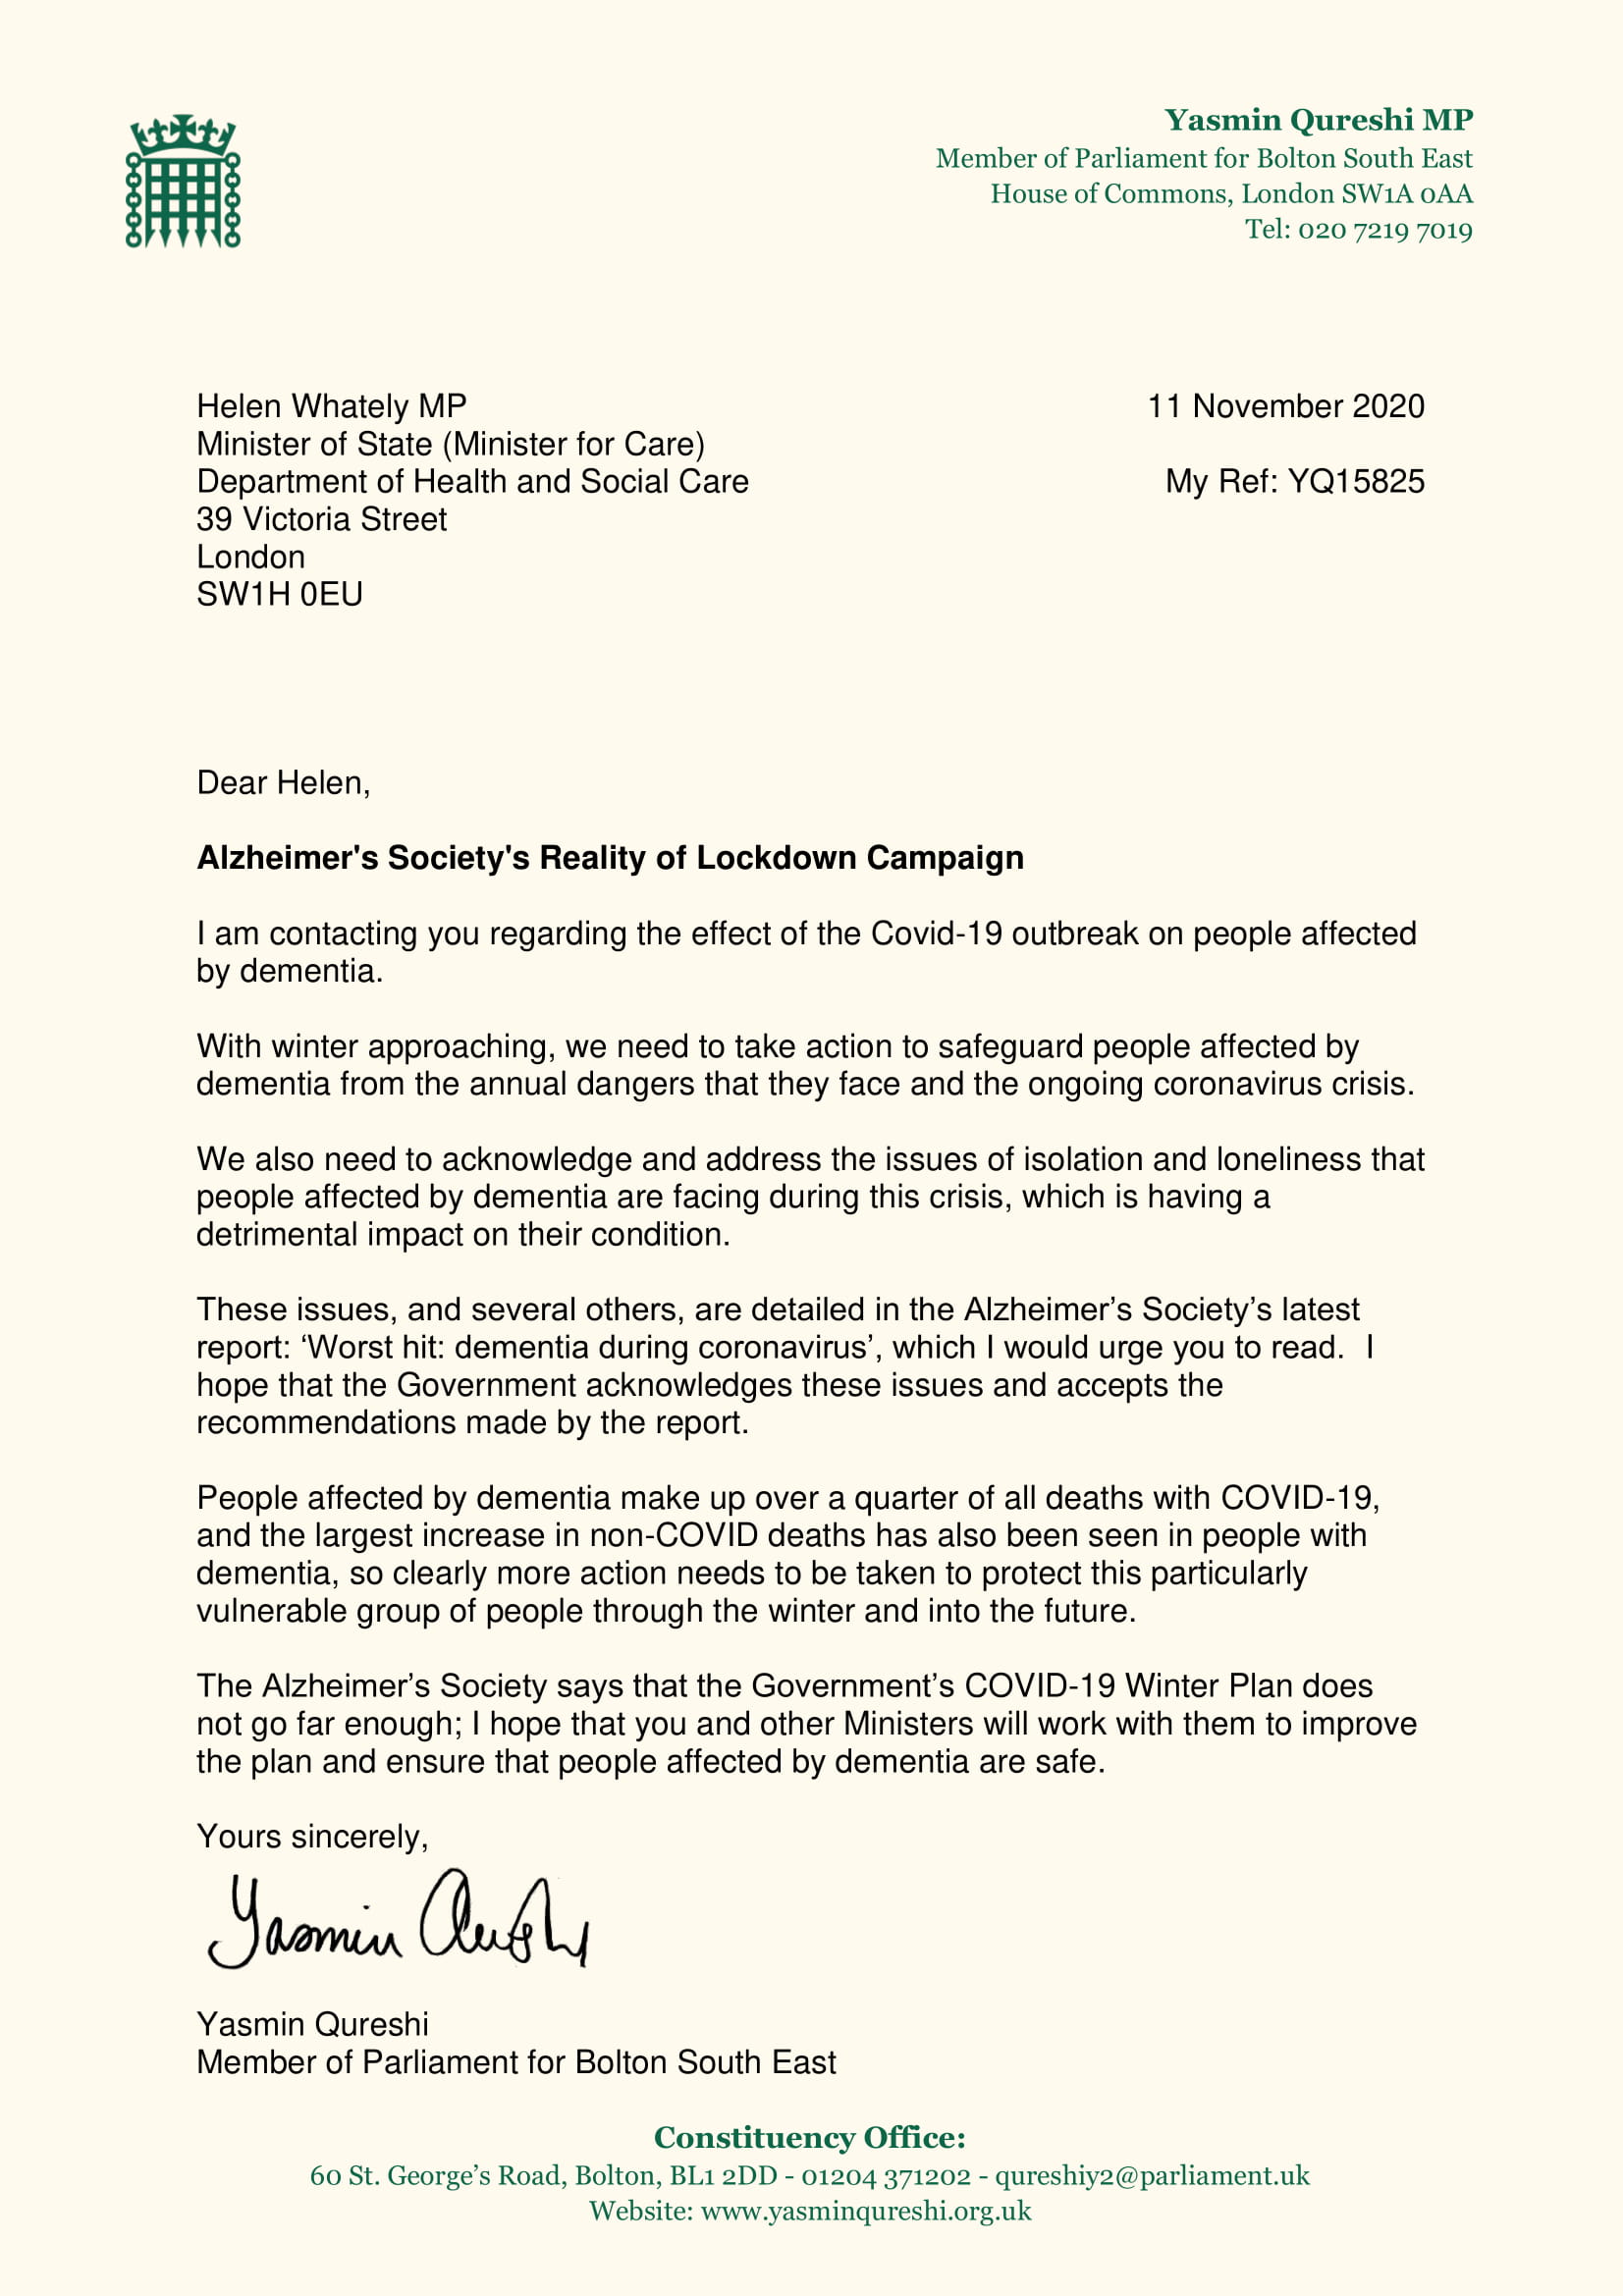 Letter to Helen Whately